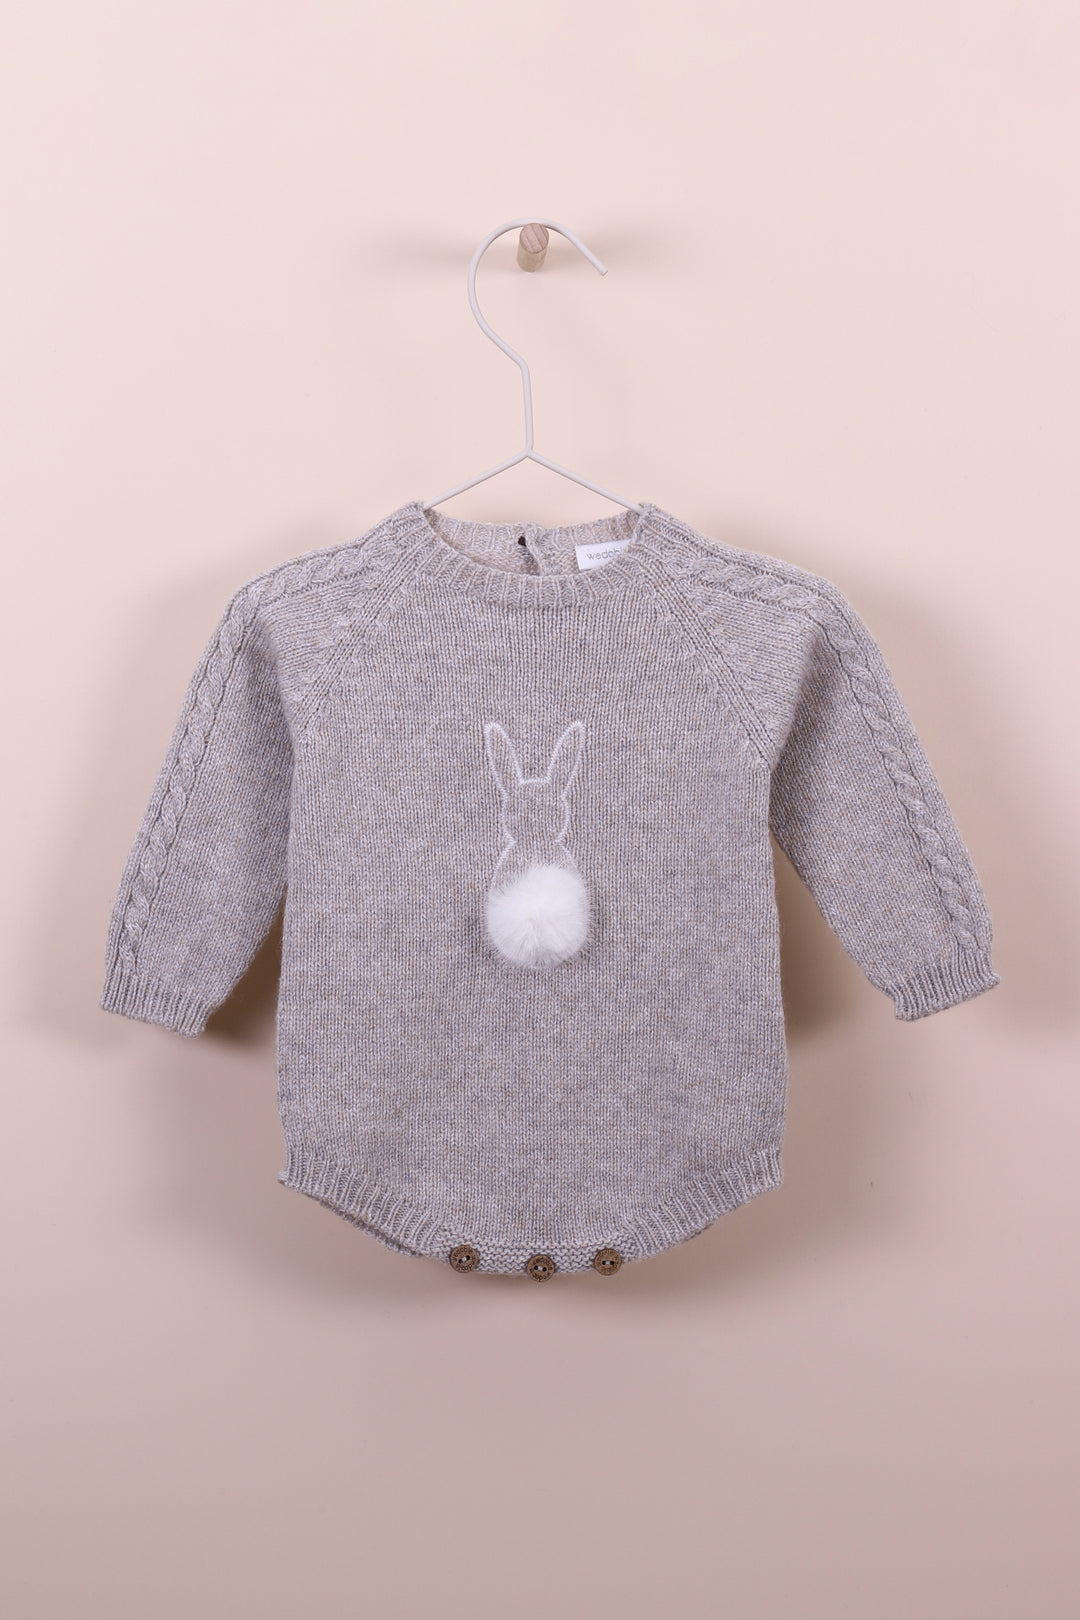 Wedoble "Angel" Cashmere Bunny Shortie | Millie and John